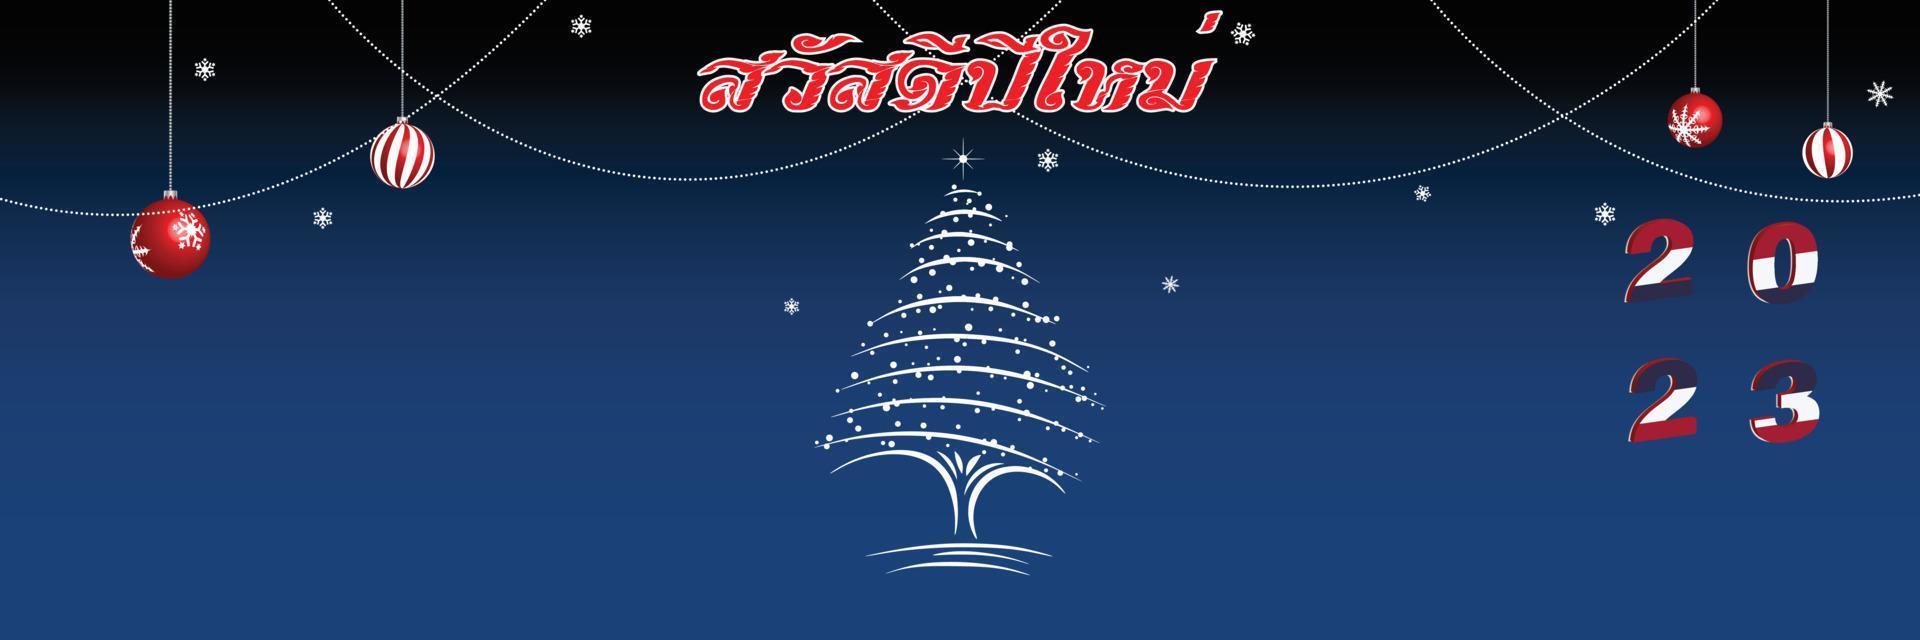 Merry Christmas and Happy New Year web page cover. Thailand flag on the year 2023. Holiday design for greeting card, banner, celebration poster, party invitation. Vector illustration.